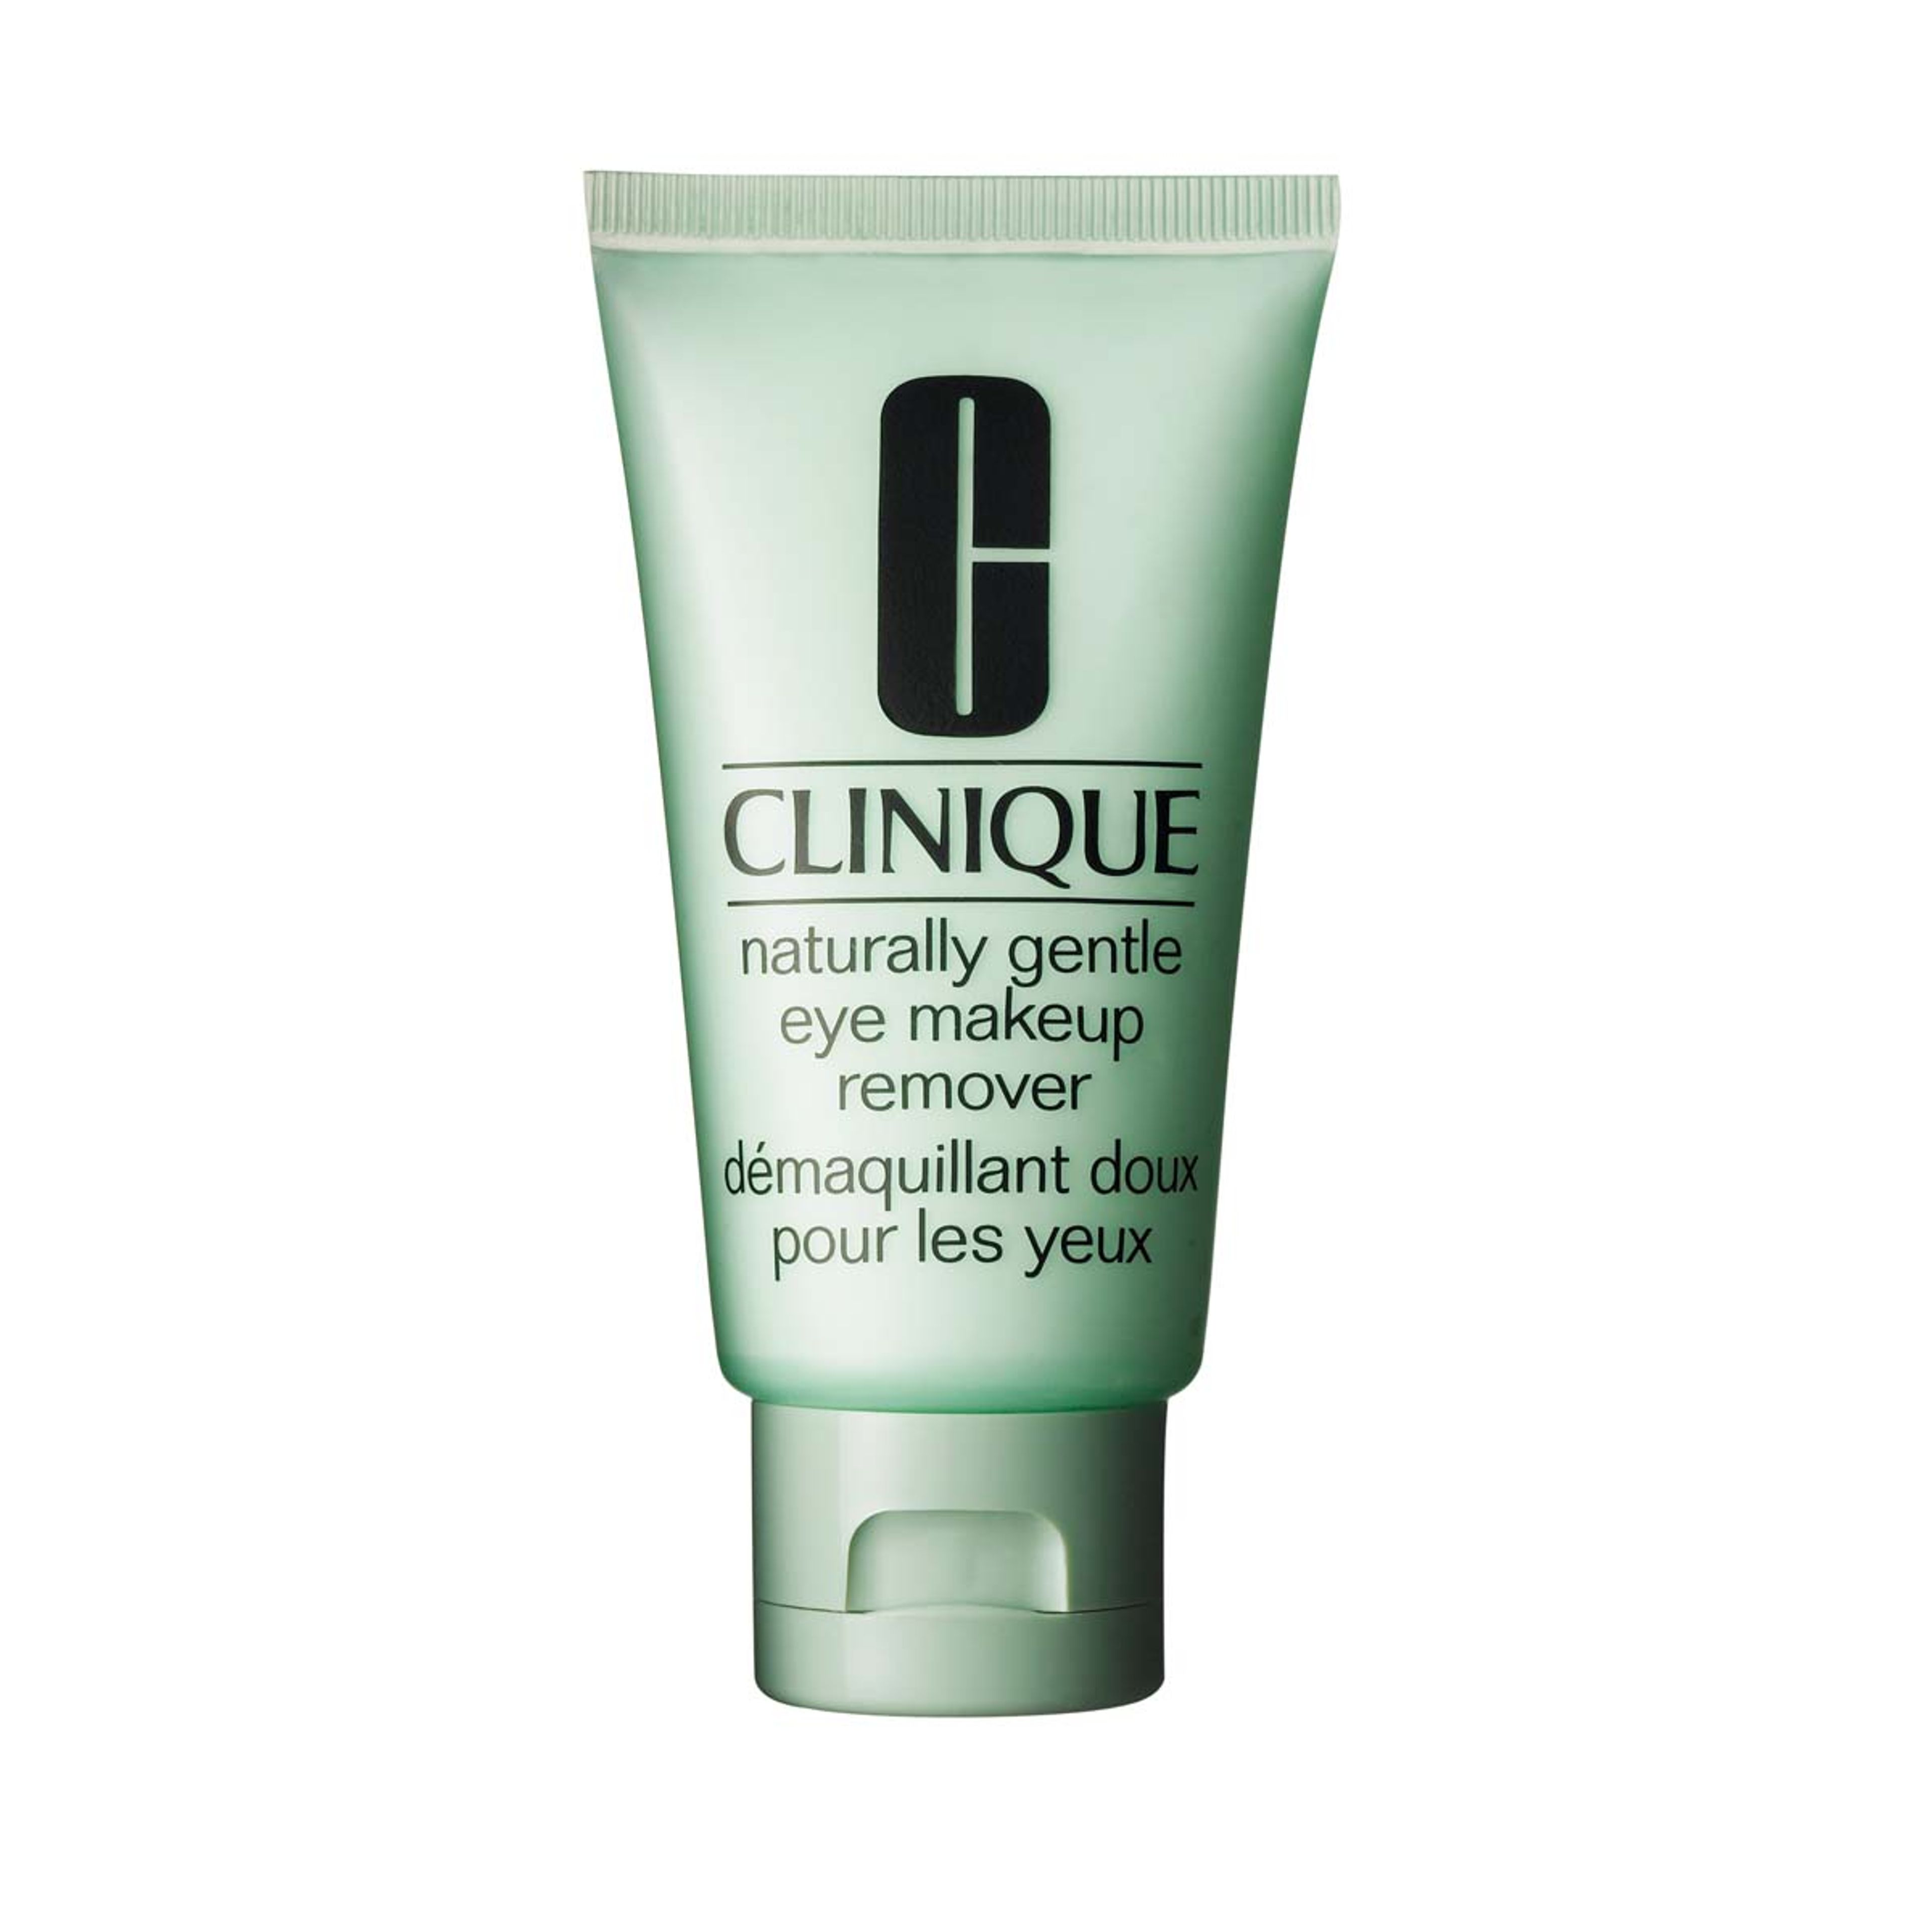 Clinique Naturally Gentle Eye Make Up Remover 1